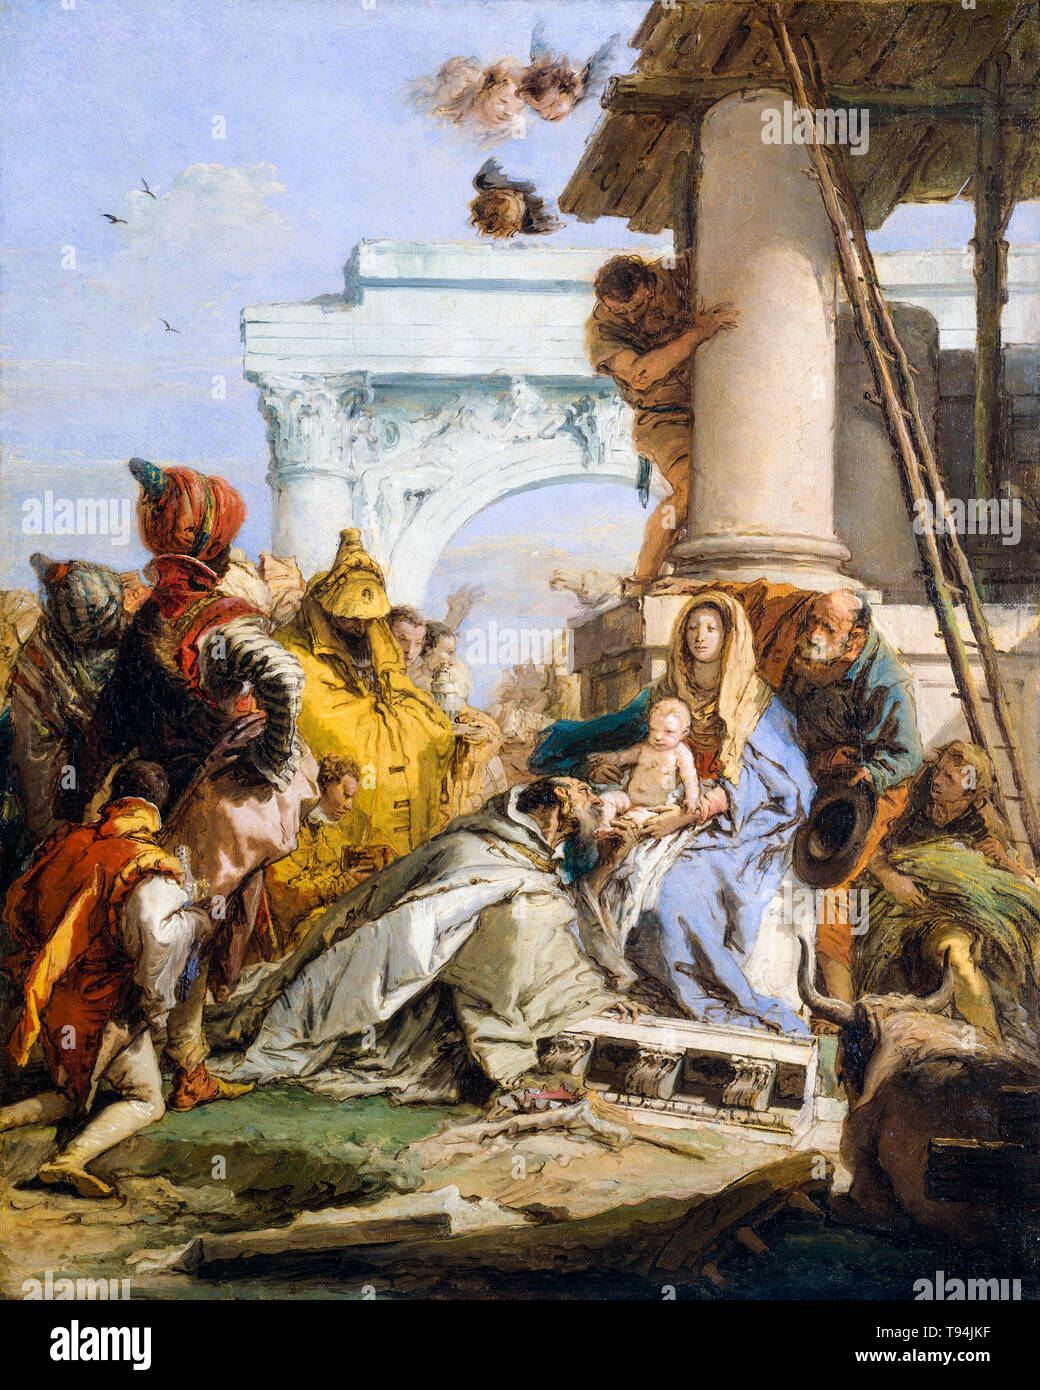 The Adoration of the Magi, painting by Giovanni Battista Tiepolo, late 1750s Stock Photo